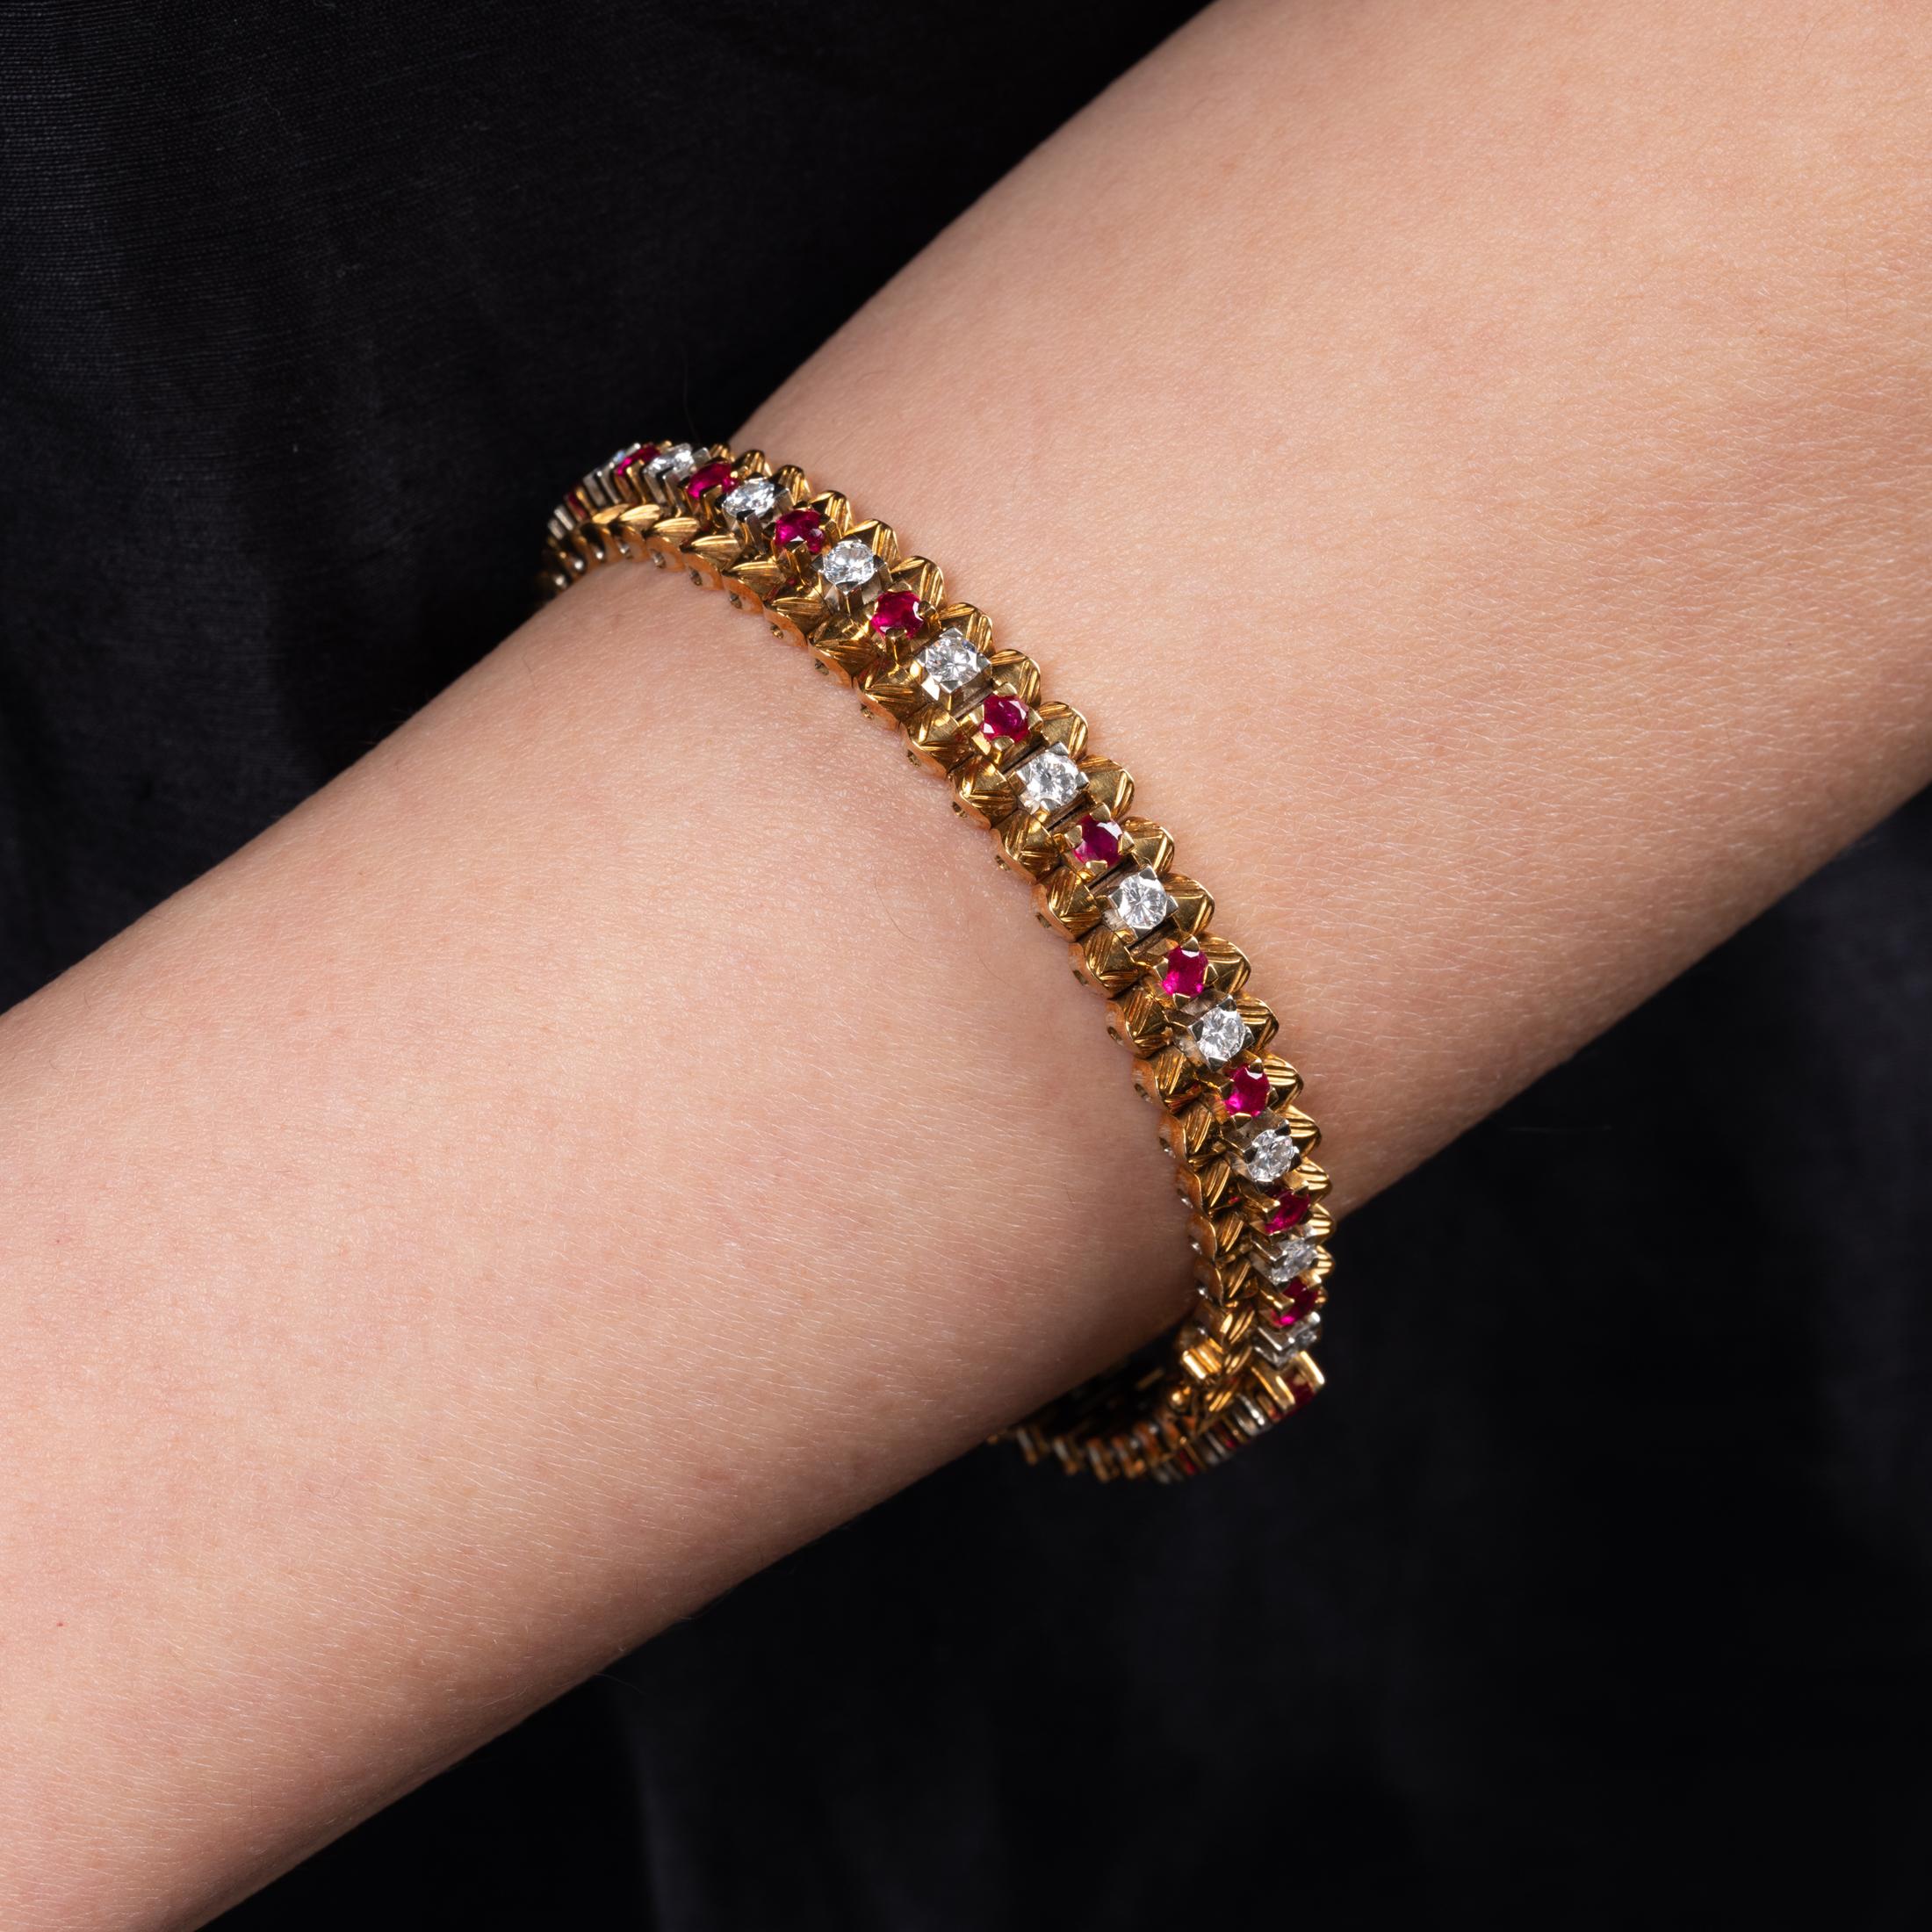 Women's Gold Diamonds and Rubies French Vintage Bracelet